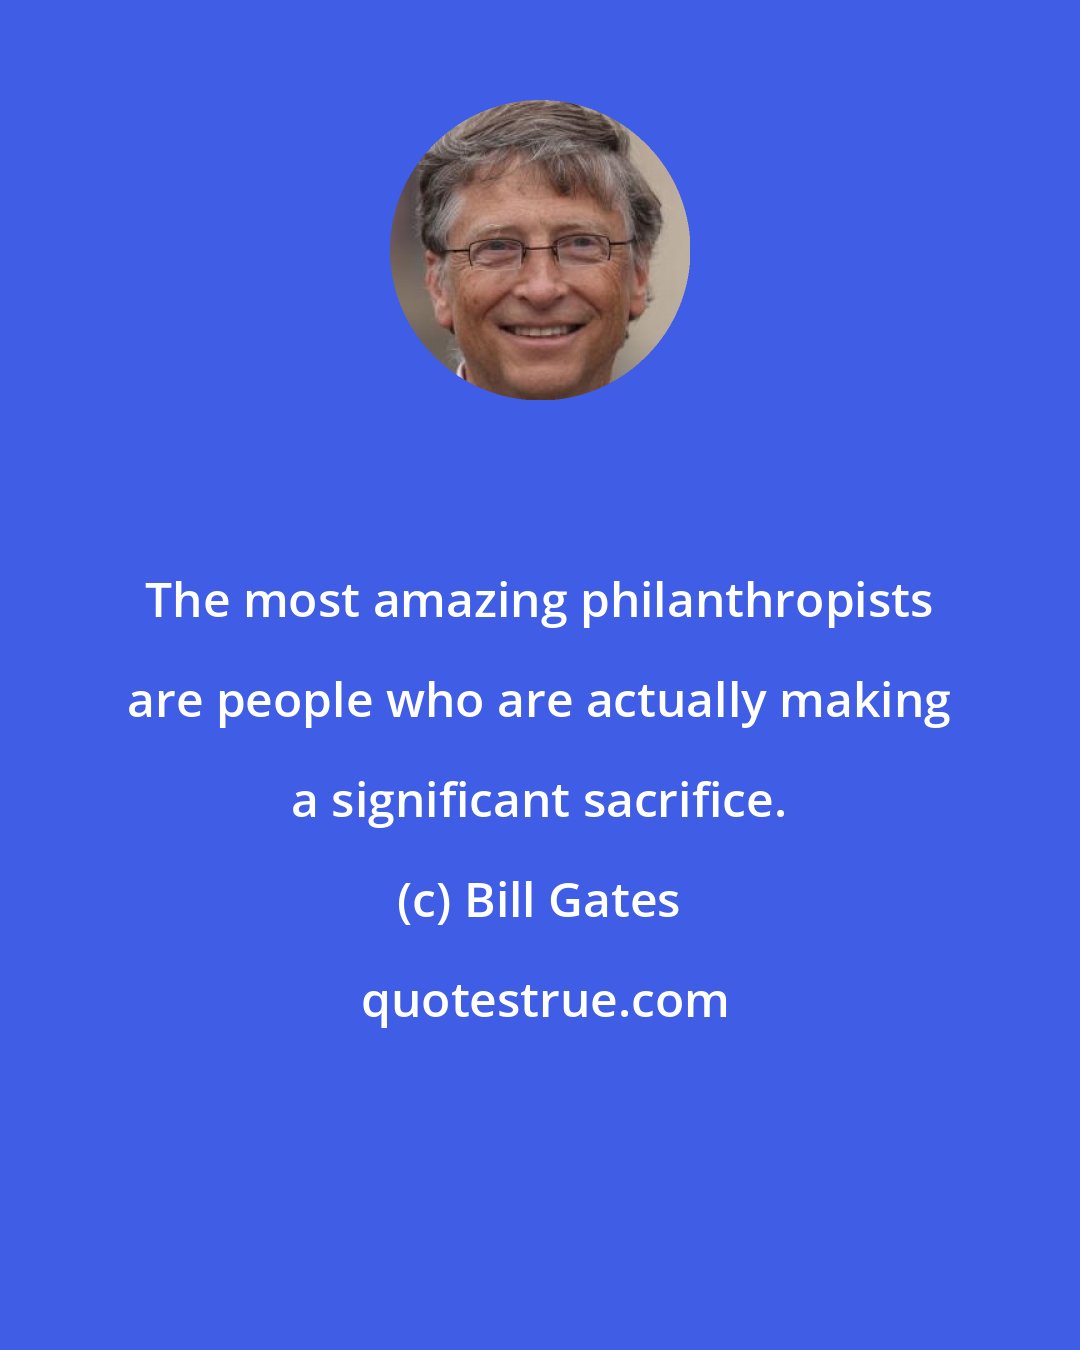 Bill Gates: The most amazing philanthropists are people who are actually making a significant sacrifice.